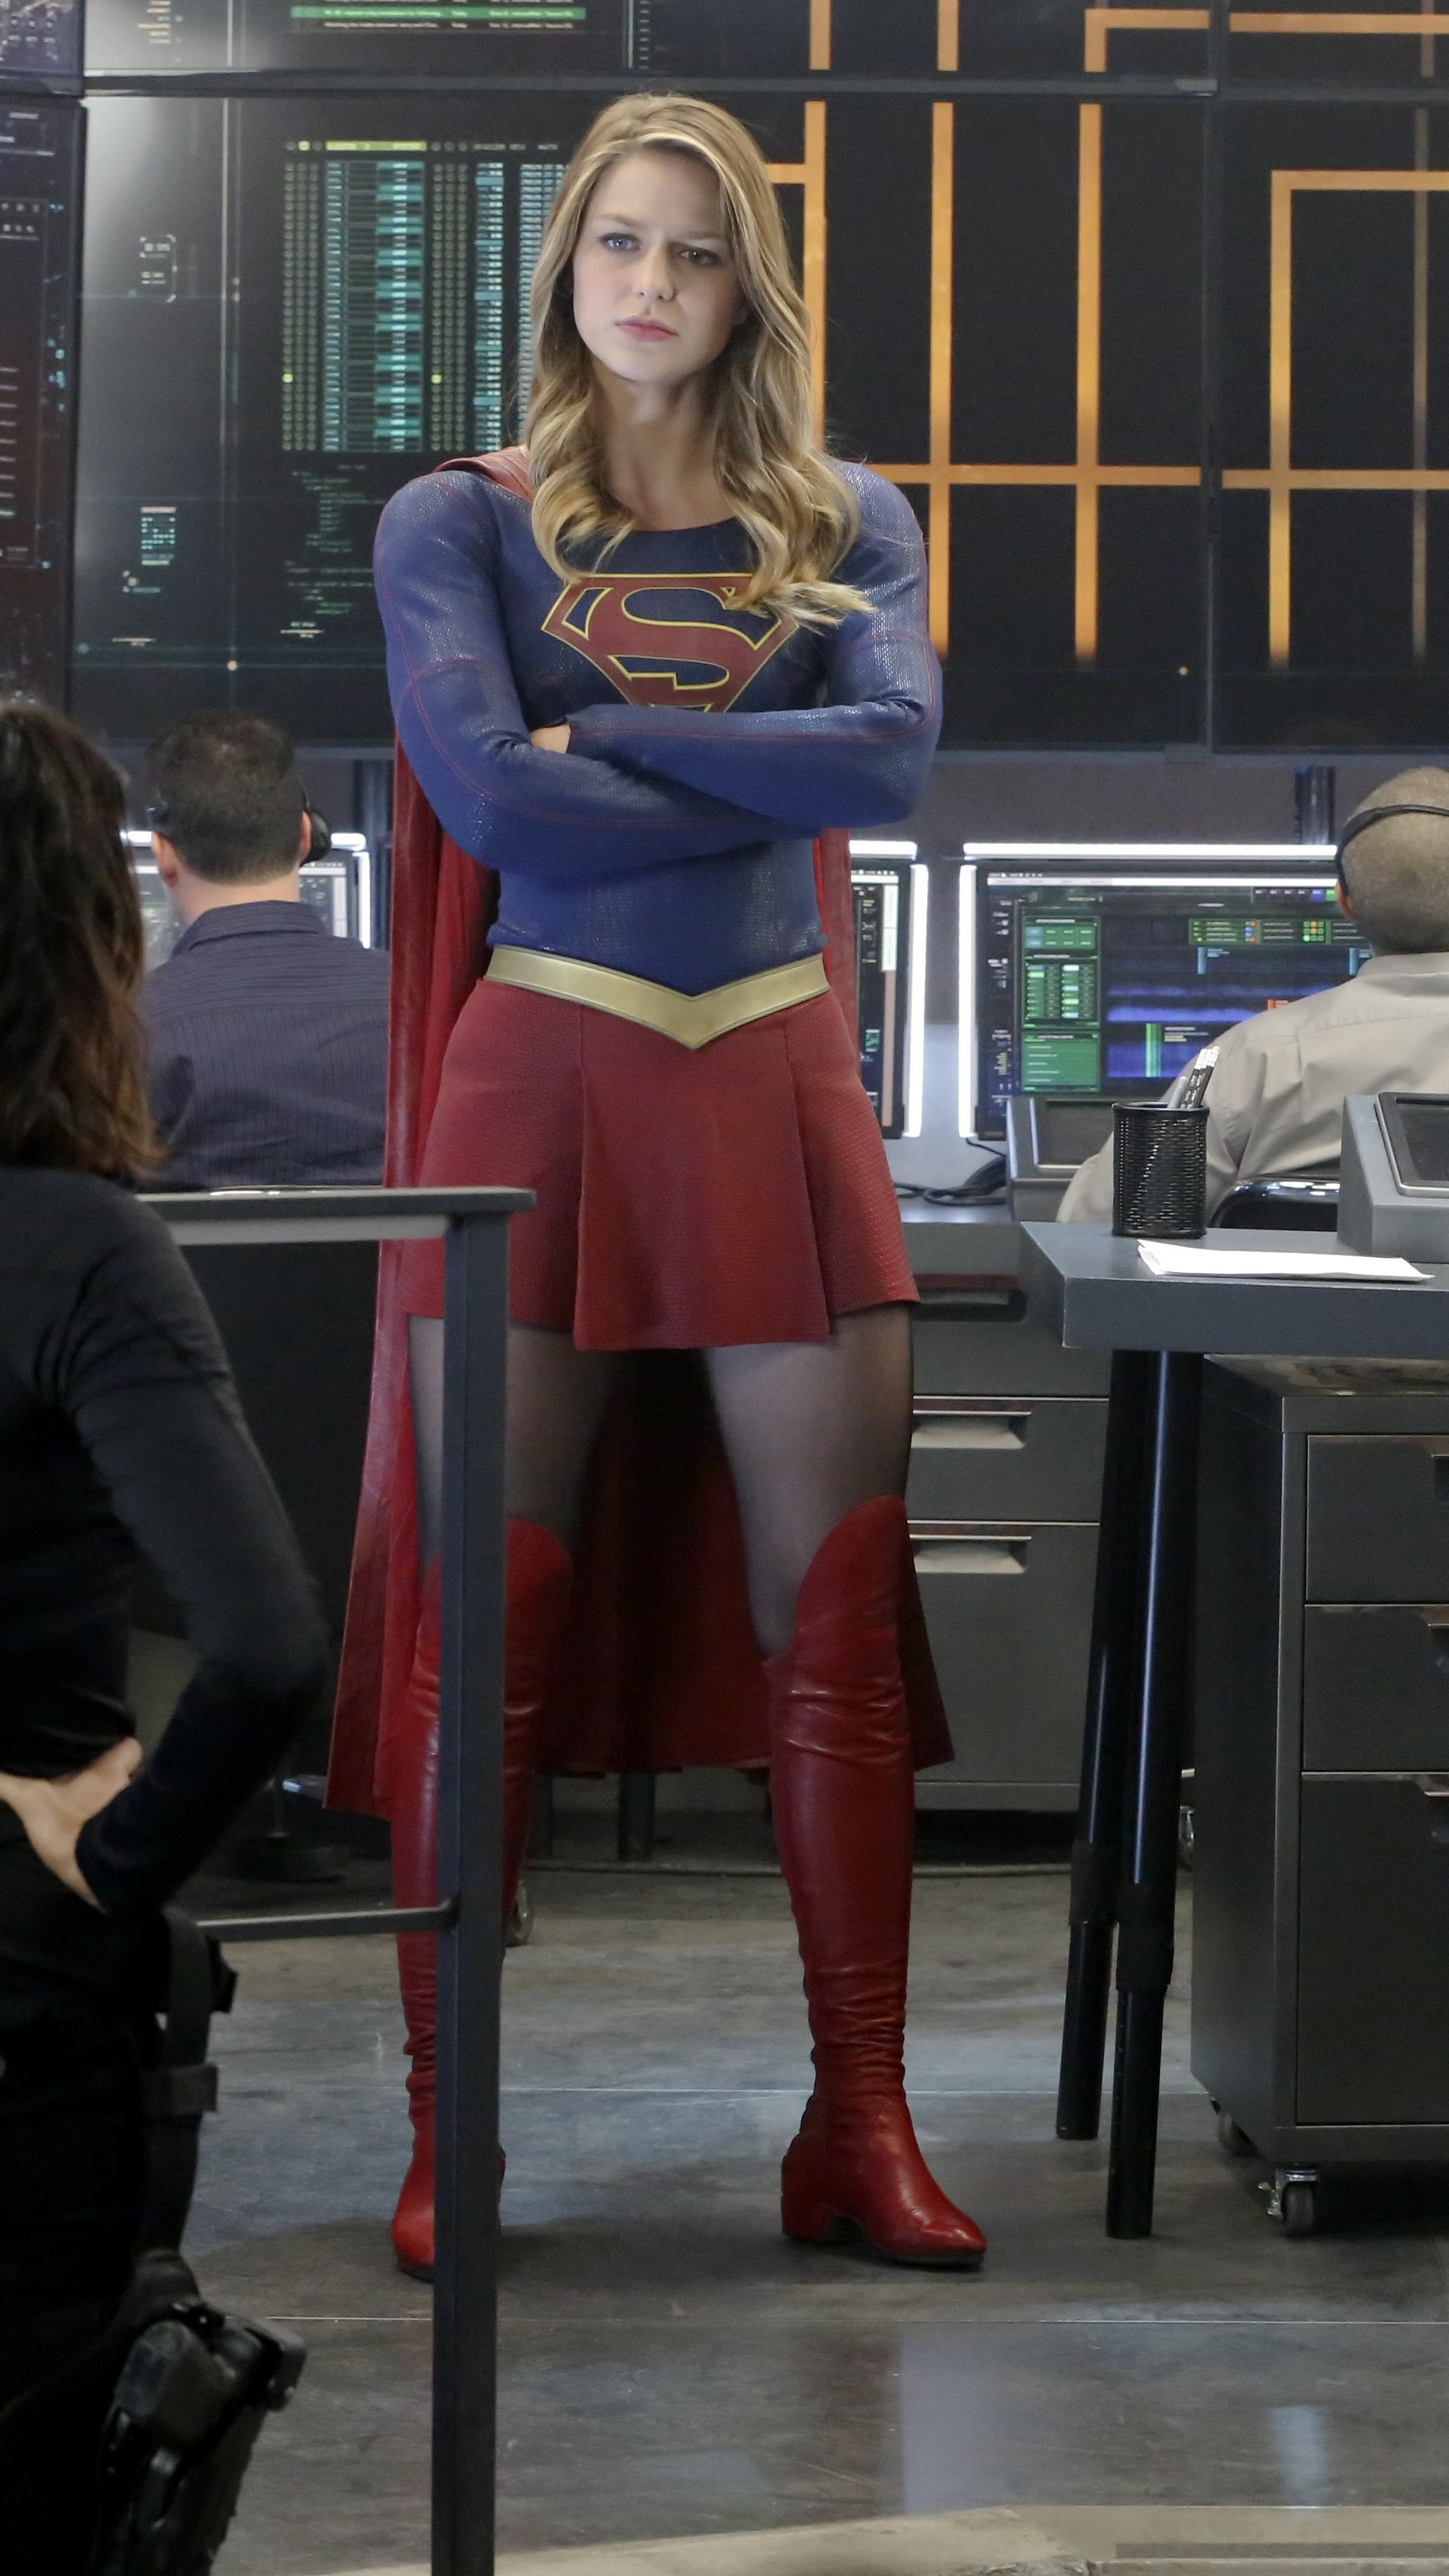 Wallpaper The Flash Supergirl Crossover Grant Gustin 